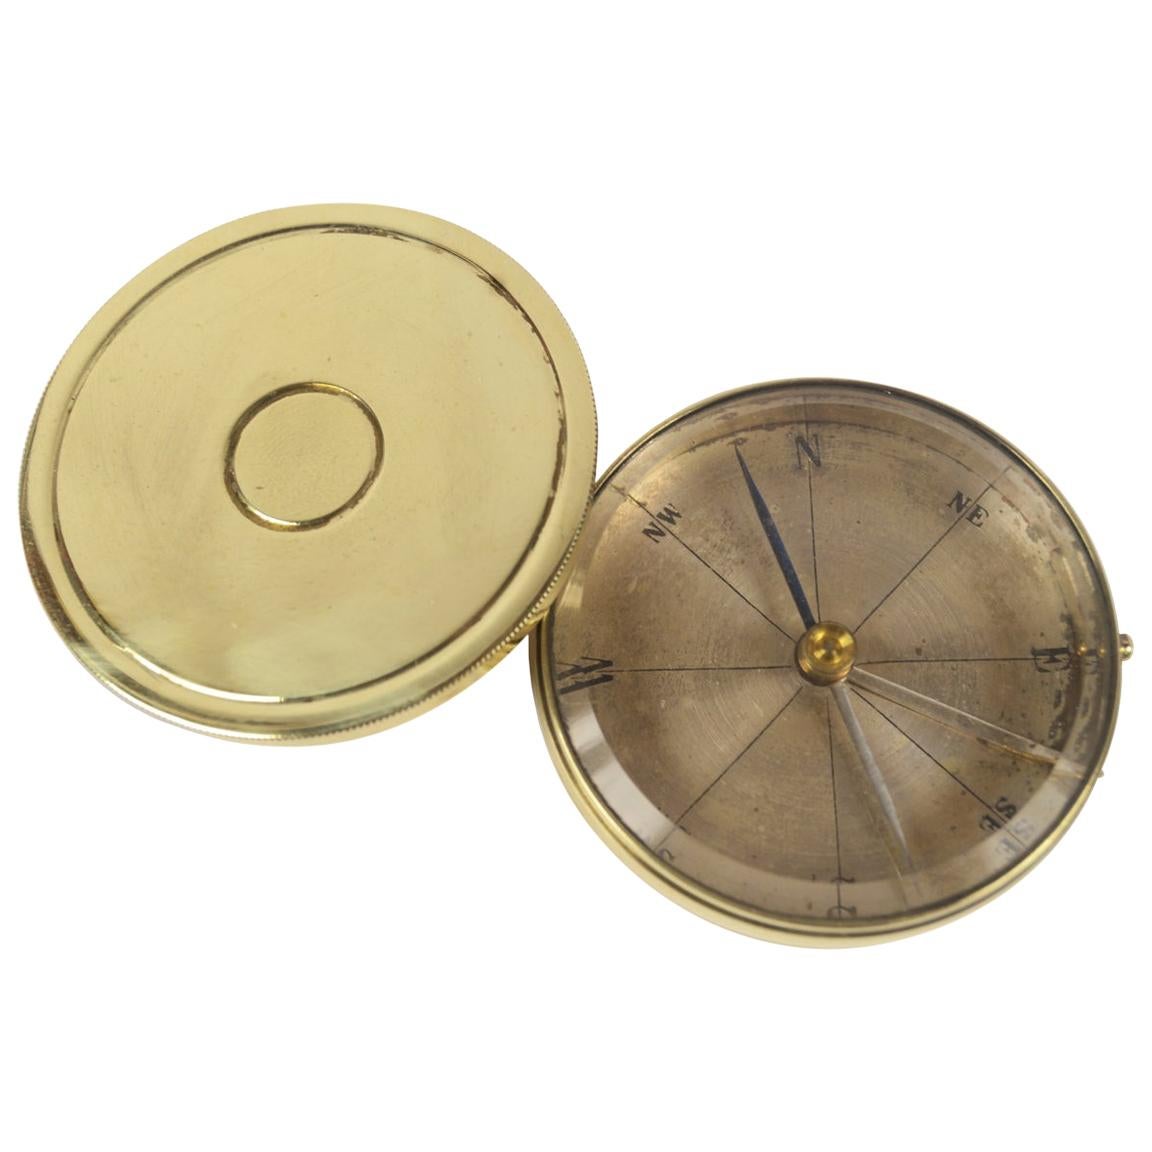 1900s French Manufacture Antique Pocket Magnetic Compass Made of Turned Brass 